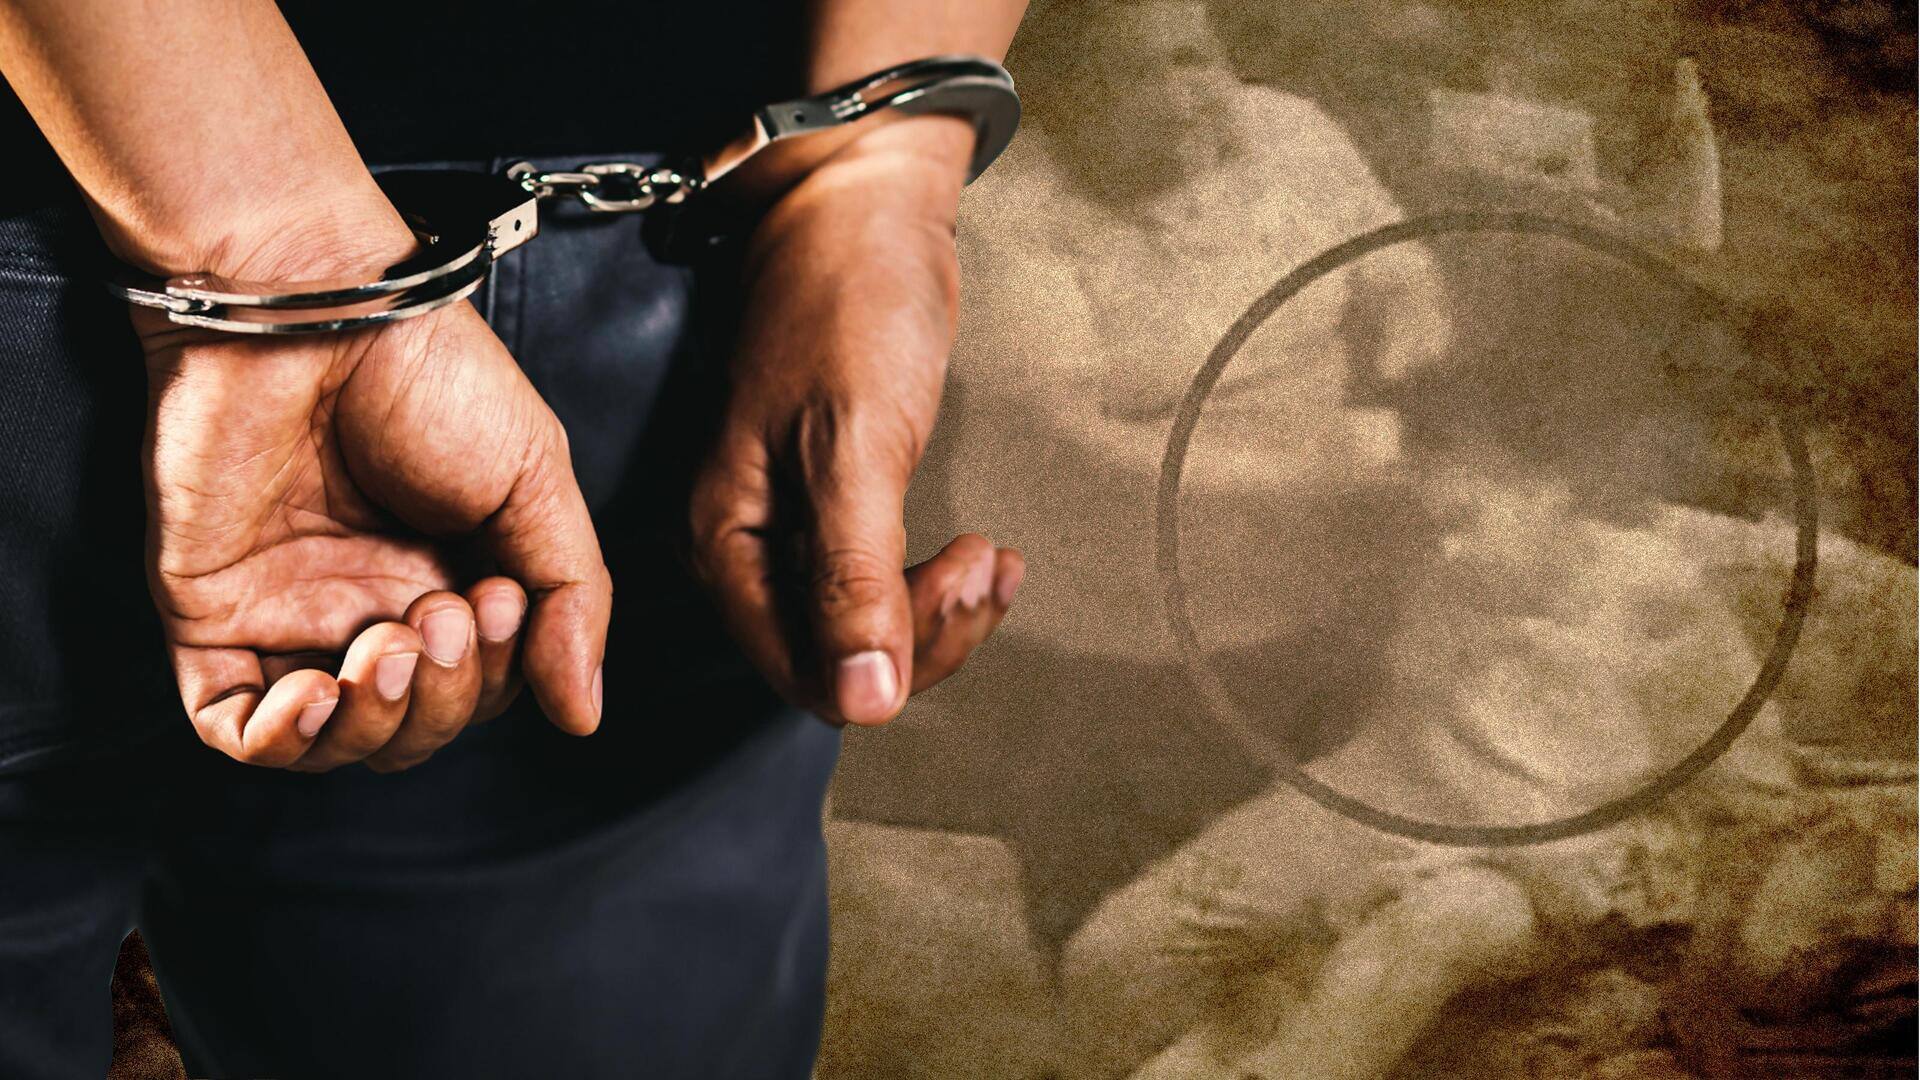 Punjab lawyer arrested for torturing mother, victim rescued by NGO